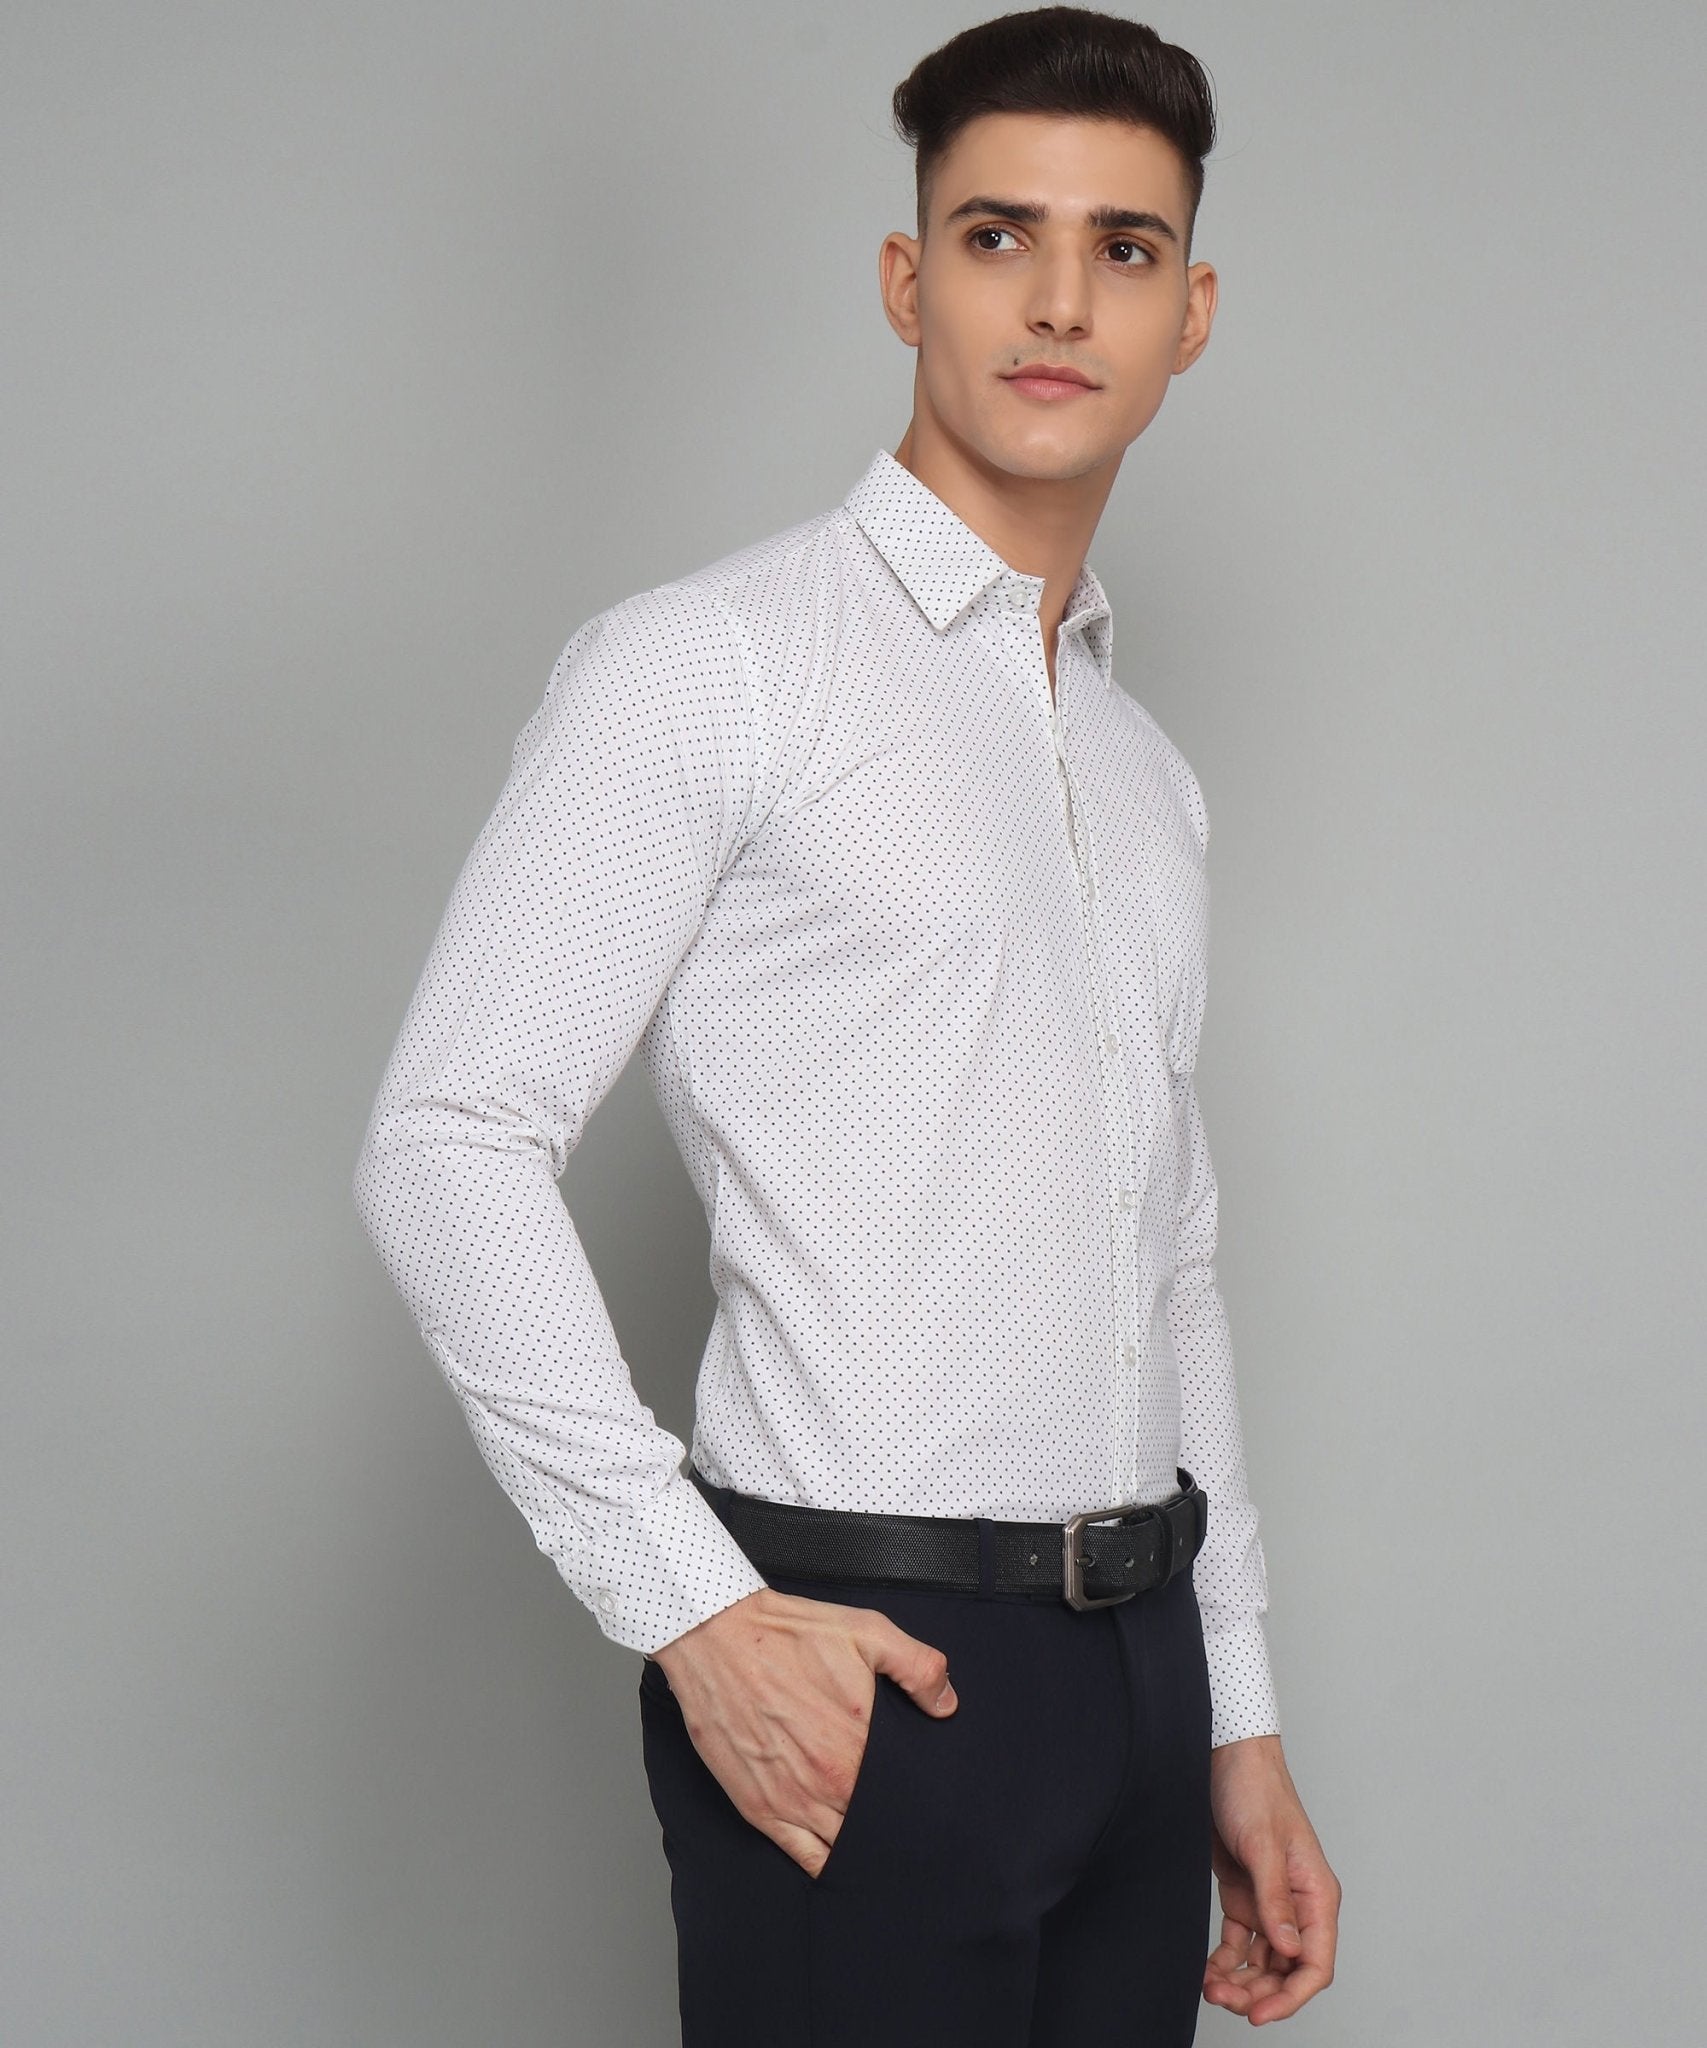 TryBuy Premium Pure Cotton Star Dot Printed Cotton Casual/Formal White Shirt for Men - TryBuy® USA🇺🇸